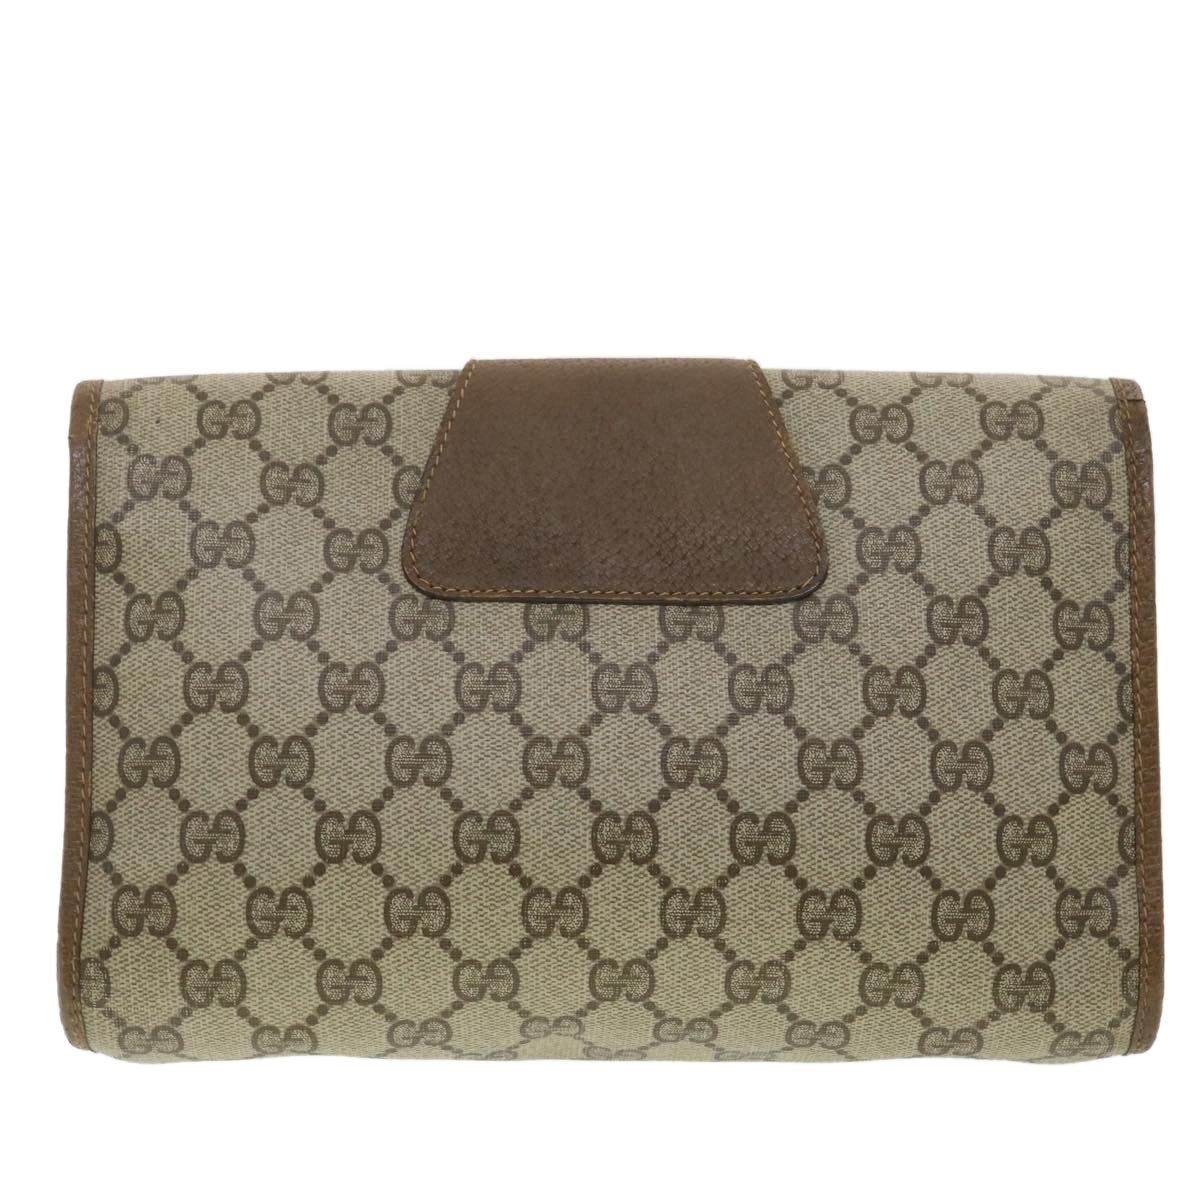 GUCCI GG Canvas Web Sherry Line Clutch Bag Beige Green Red 89.01.030 Auth ny214 - 0